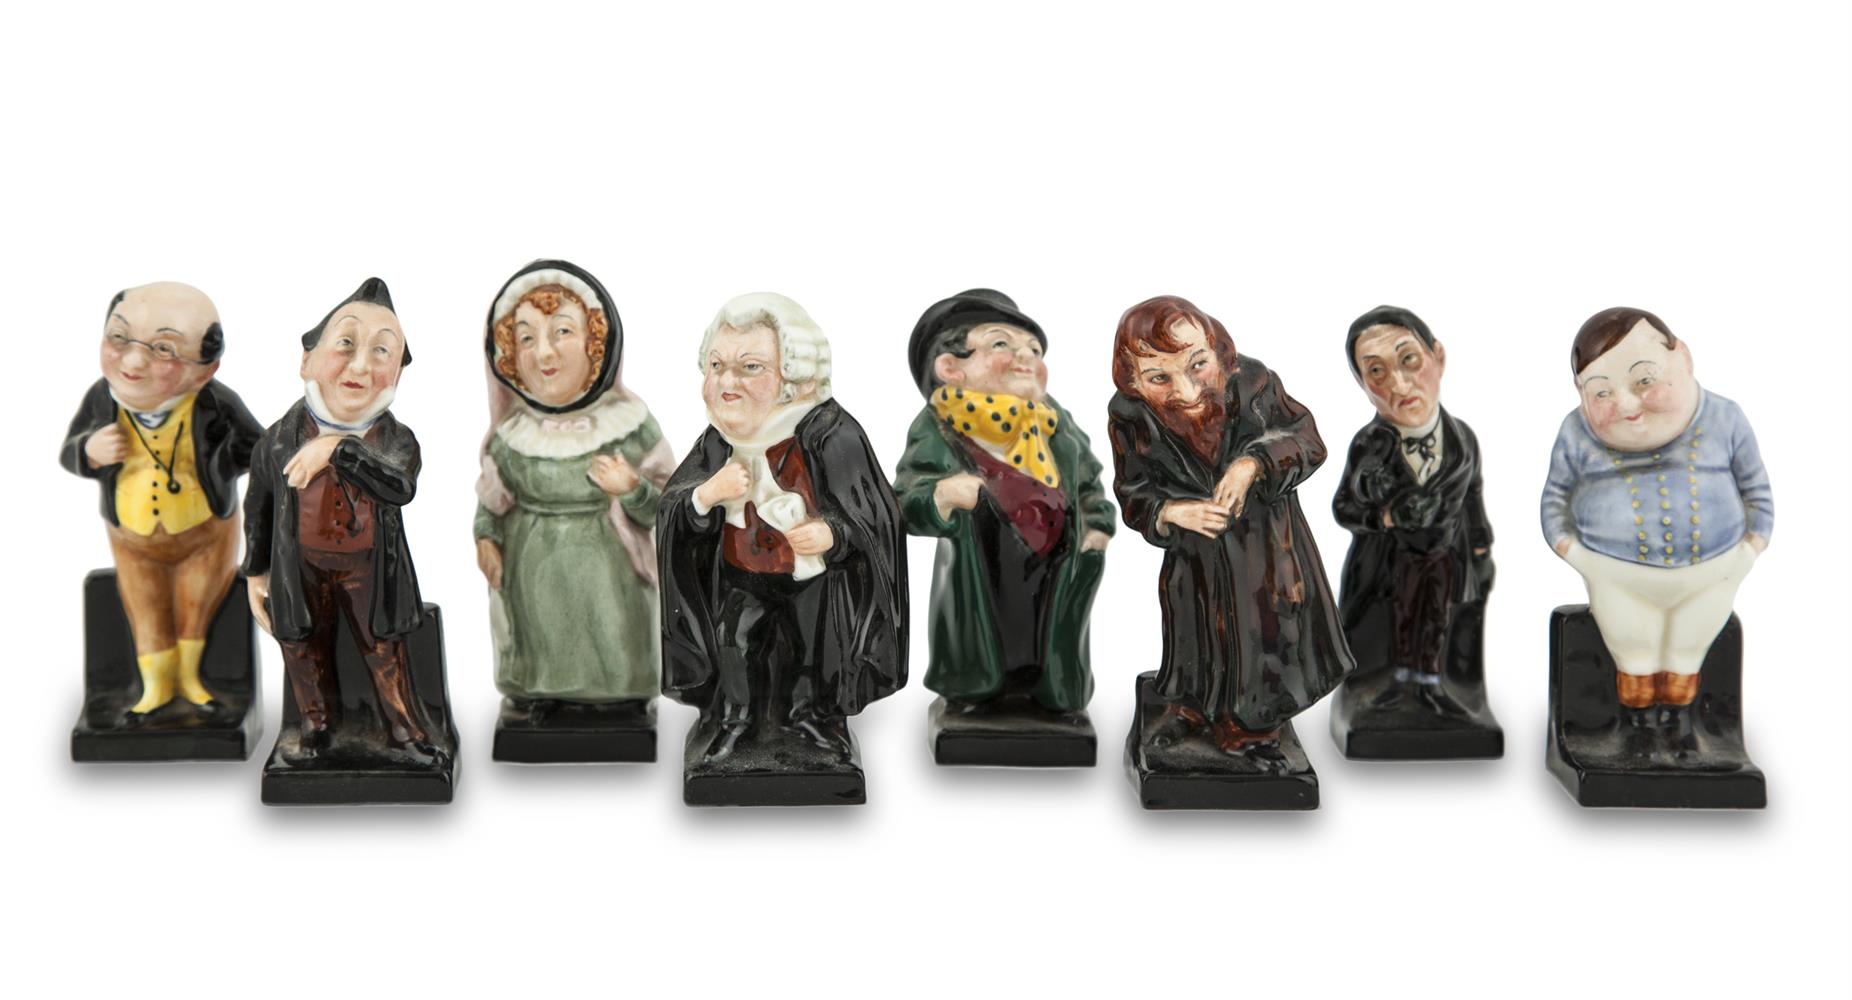 A SET OF EIGHT ROYAL DOULTON CARICATURE PORCELAIN FIGURES, depicting various characters from